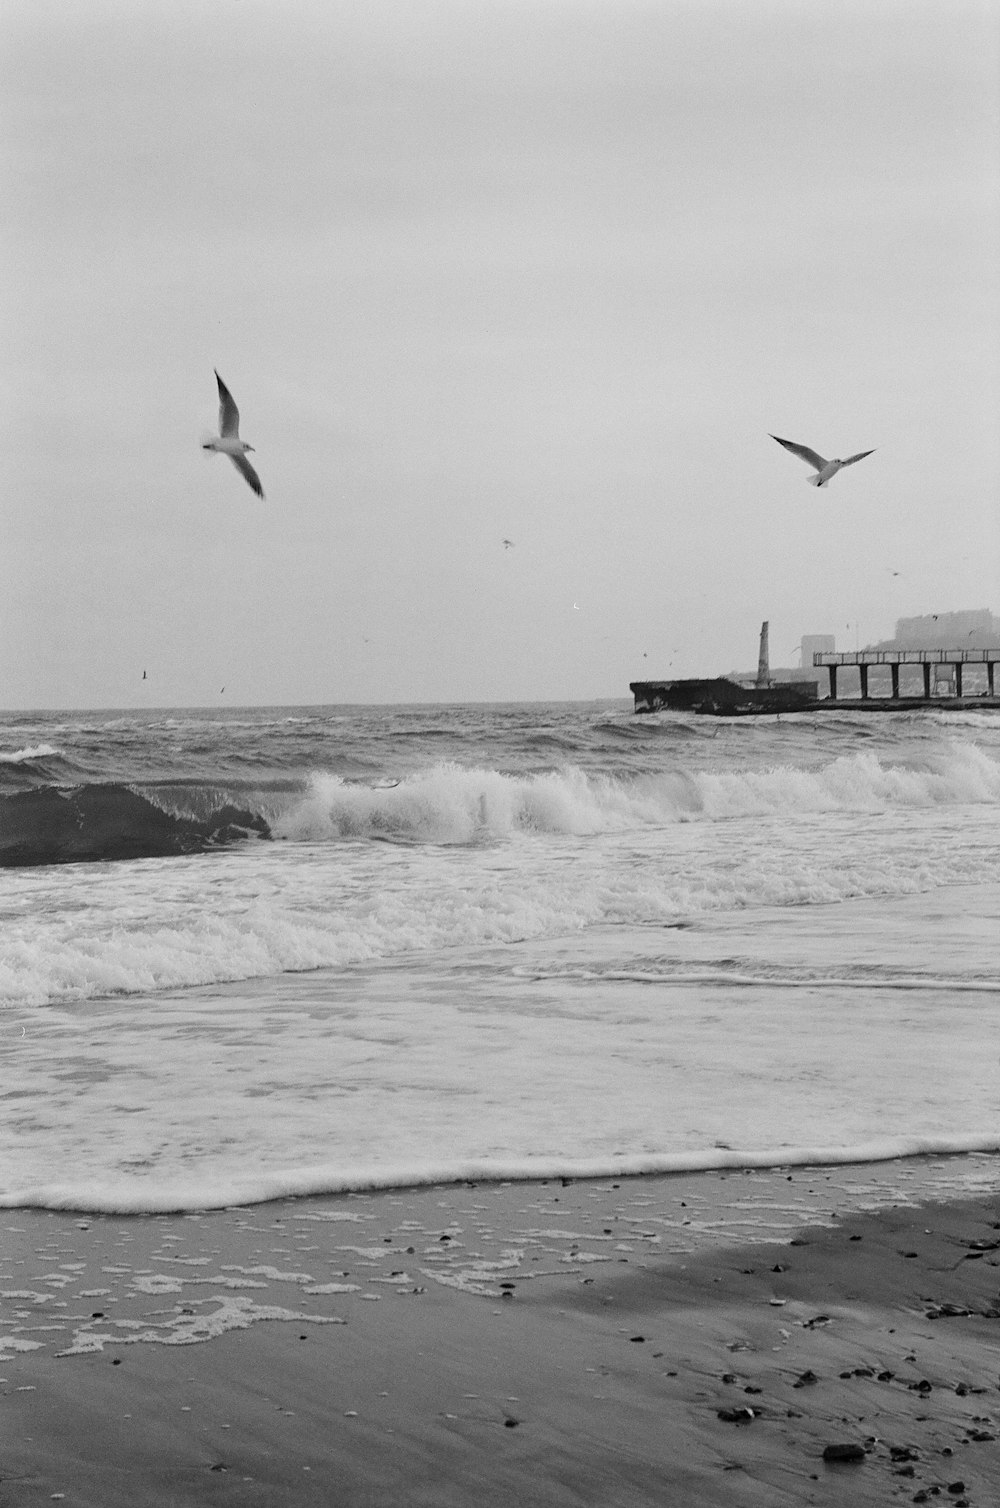 a black and white photo of seagulls flying over the ocean